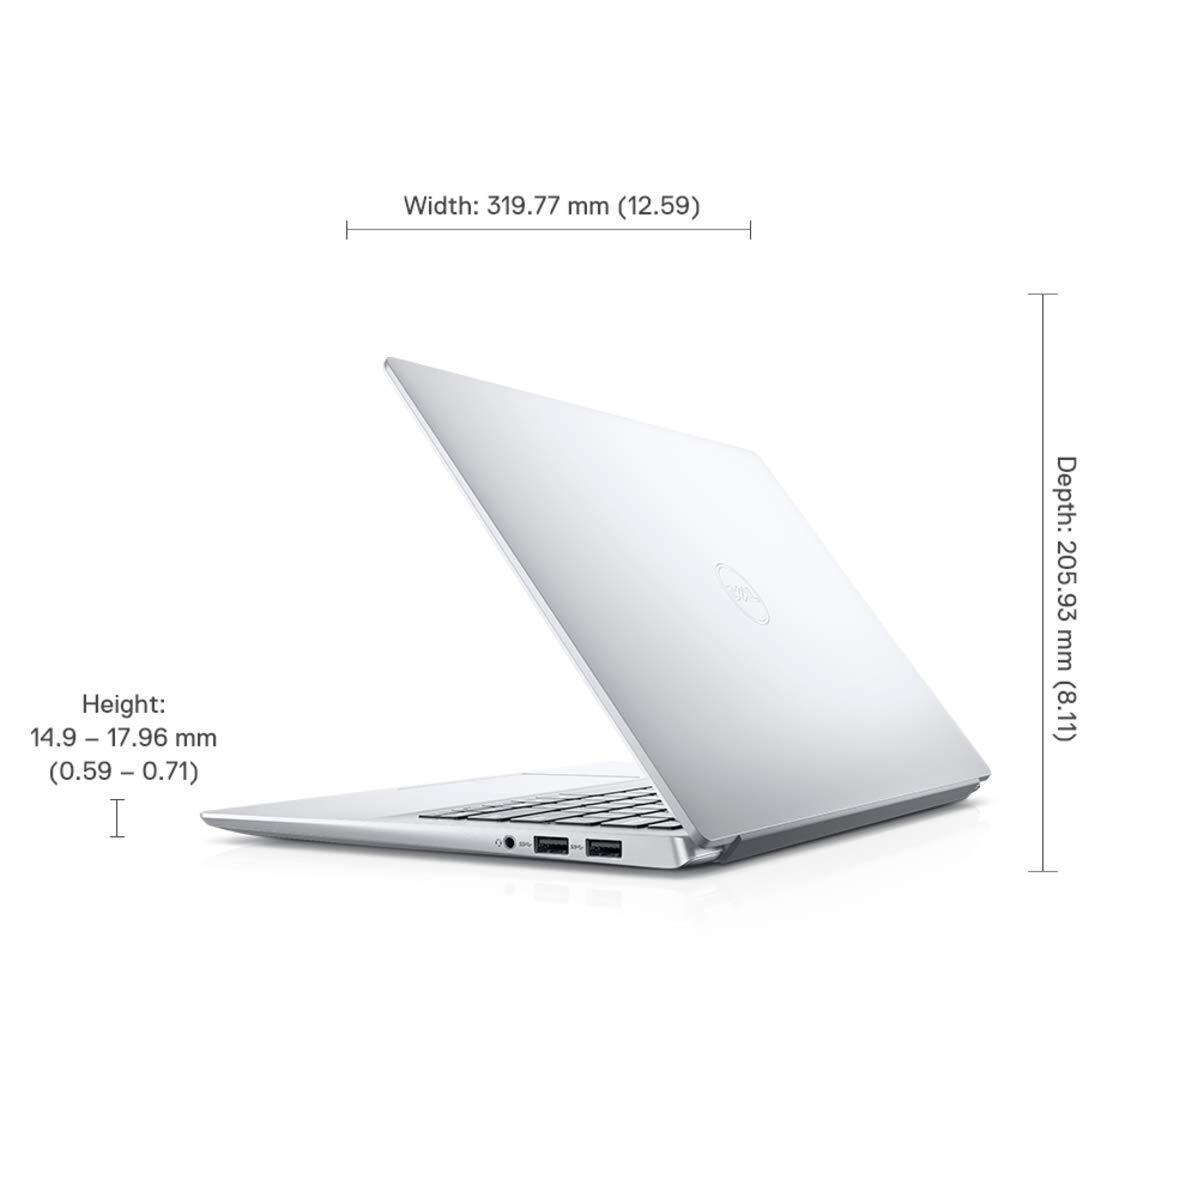 Dell Inspiron 7490 14-inch FHD Display Laptop (10th Gen i5-10210U/8GB/512GB SSD/Win 10 + MS Office/Integrated Graphics), Silver-M000000000515 www.mysocially.com